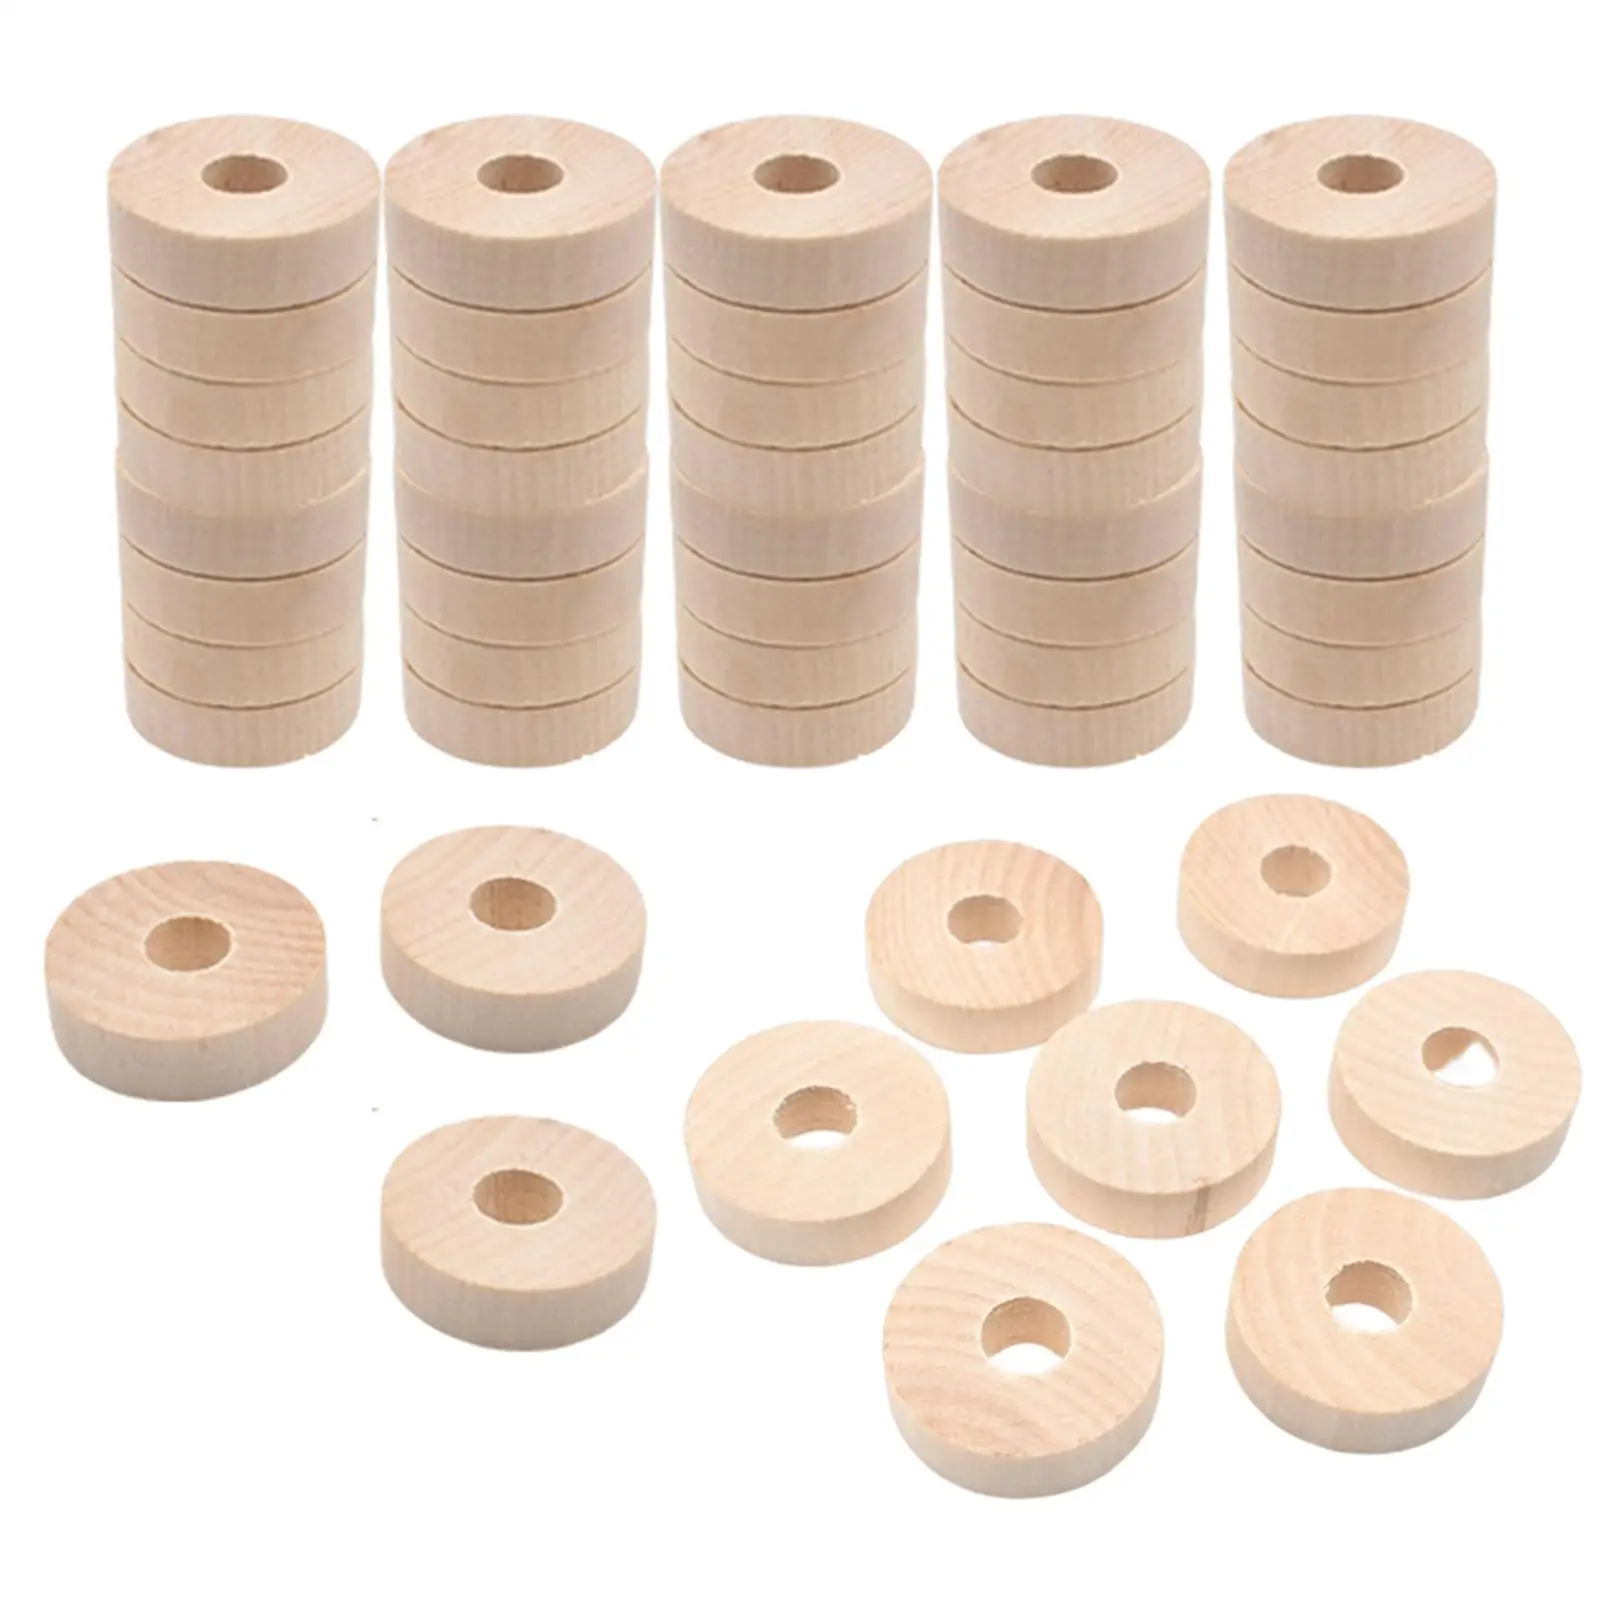 50x Wooden Wheels for Toy Cars Project Home Decor Painting Writing Kids Gift